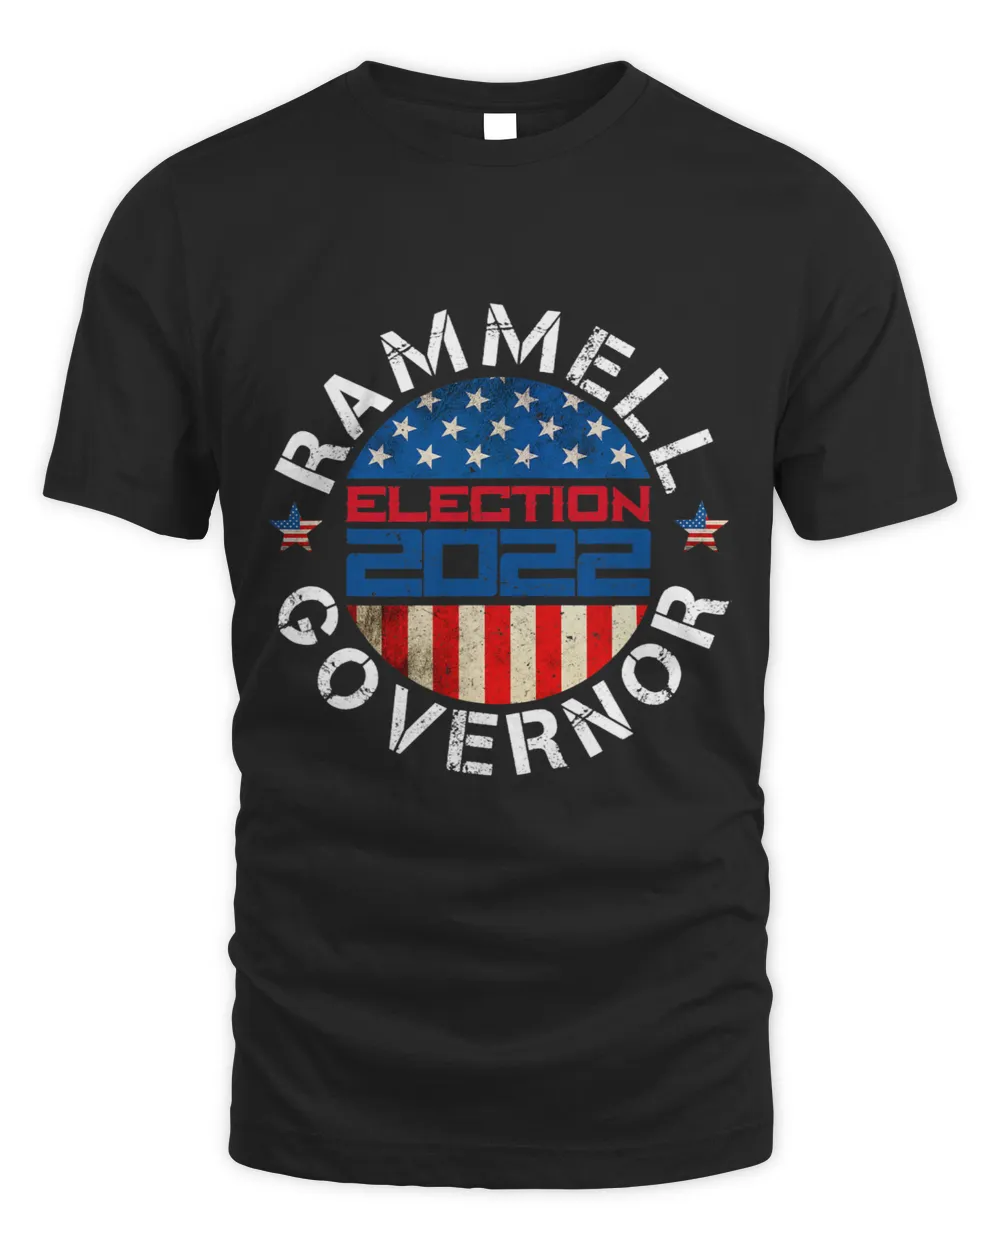 Vote Rex Rammell Campaign Wyoming Governor